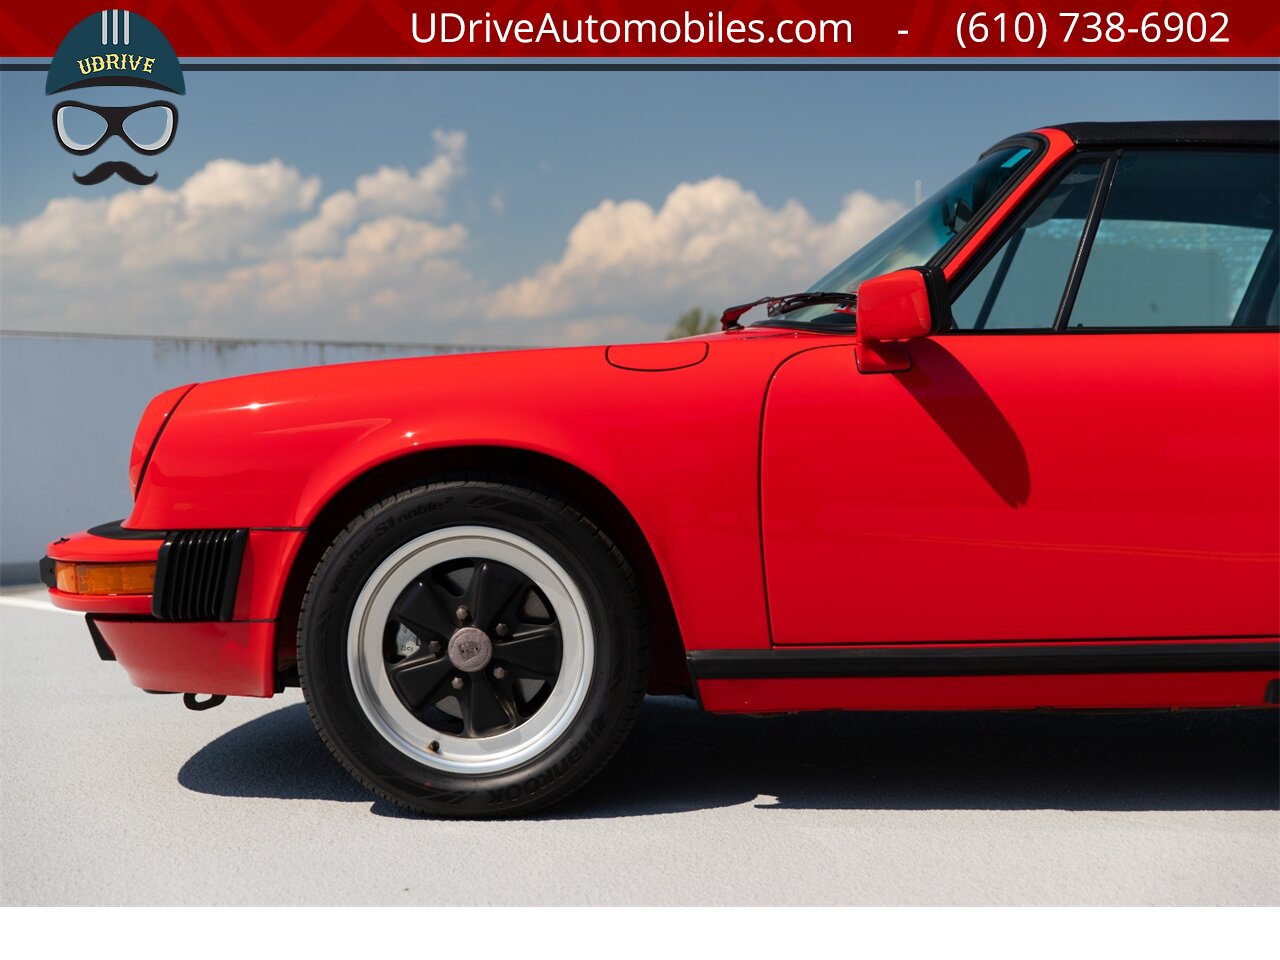 1986 Porsche 911 Carrera Targa 39k Miles Same Owner Since 1988  $23k in Service History Since 2011 - Photo 10 - West Chester, PA 19382